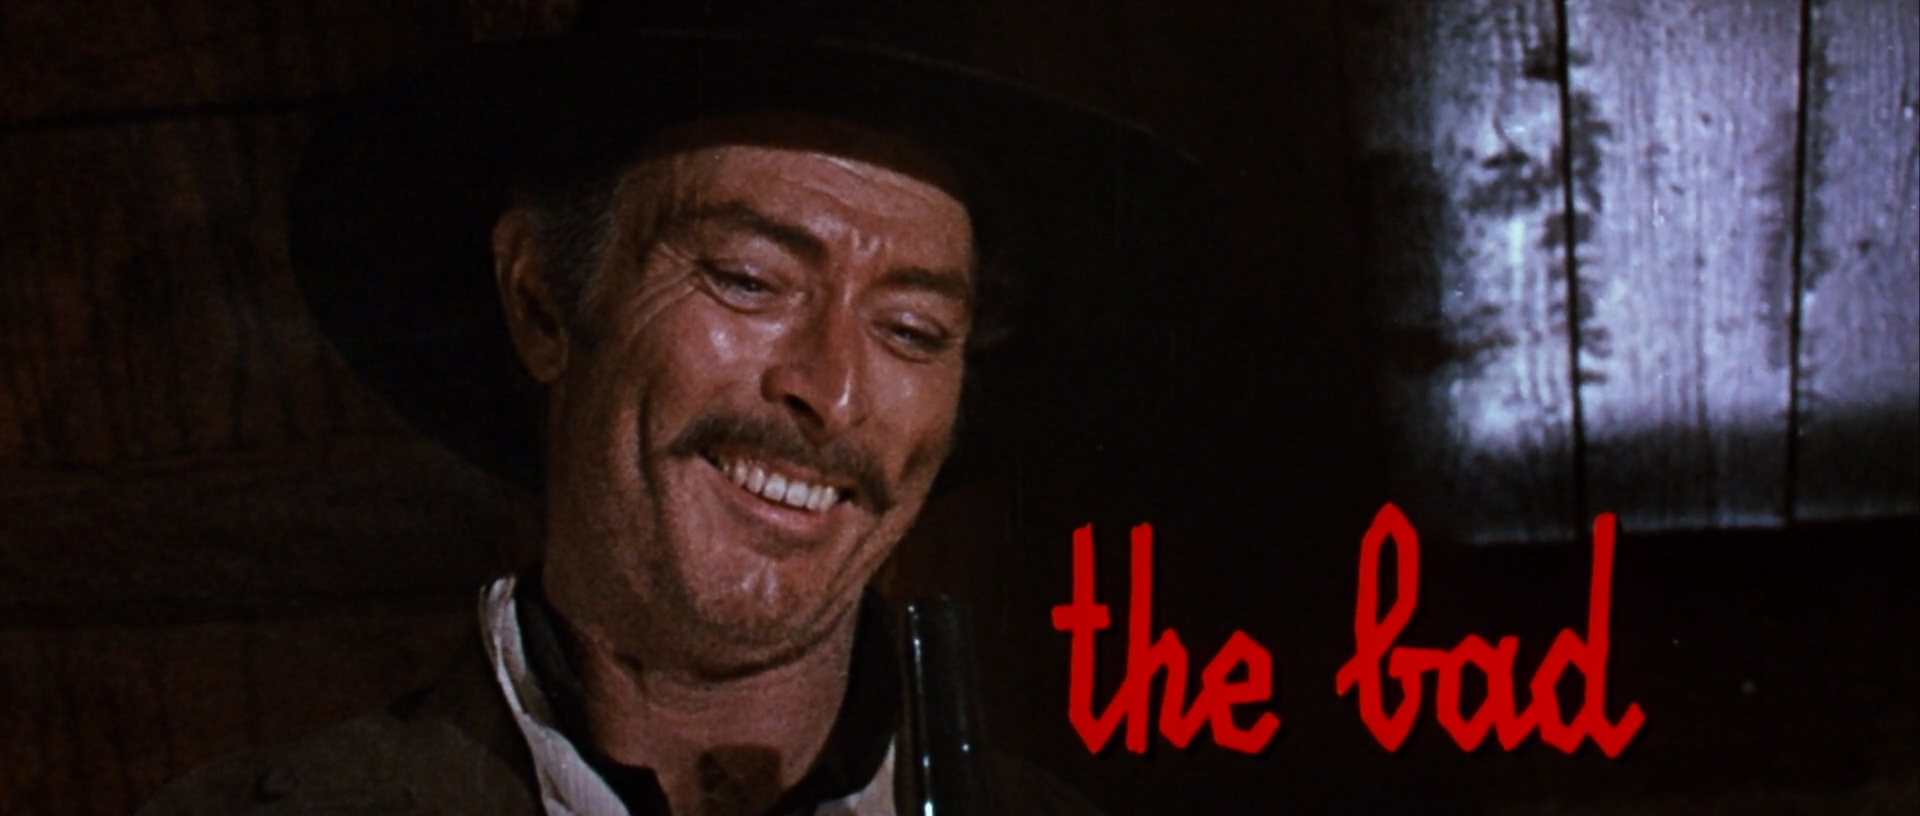 The Good, the Bad and the Ugly (1966) — Art of the Title